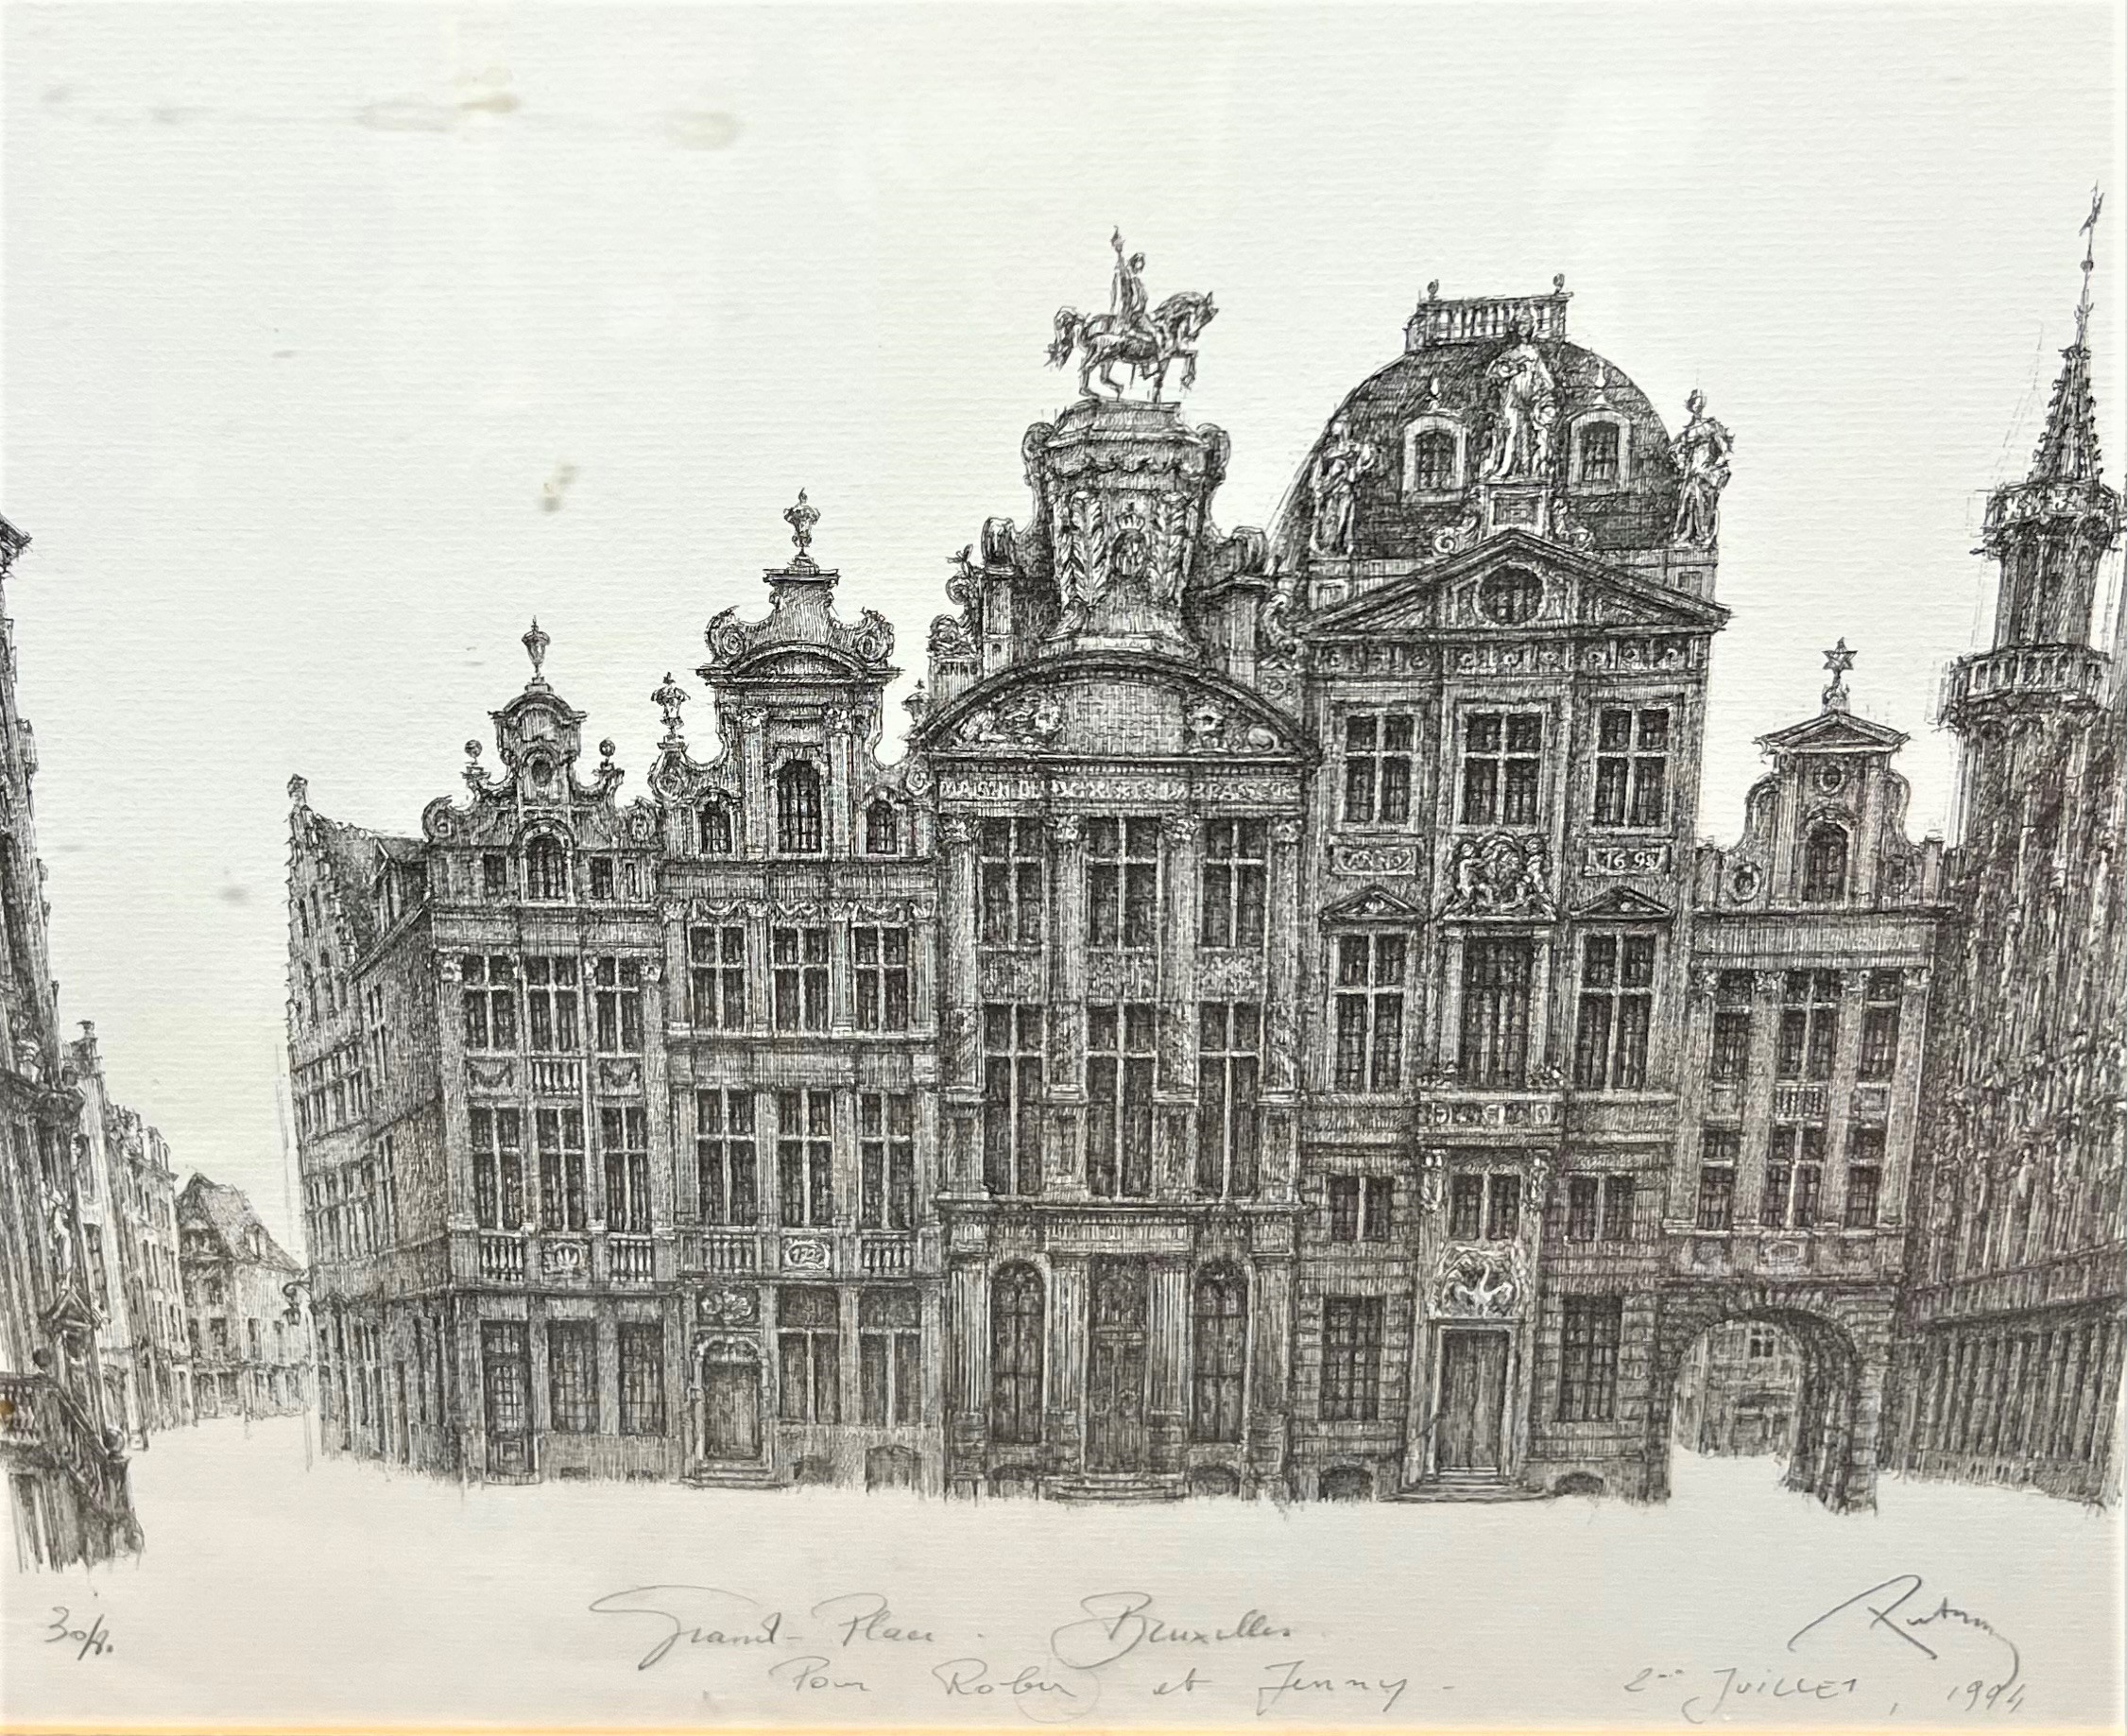 A limited edition print of The grand Plau, Bruxelles. 30/80 indistinctly signed. Framed and Glazed